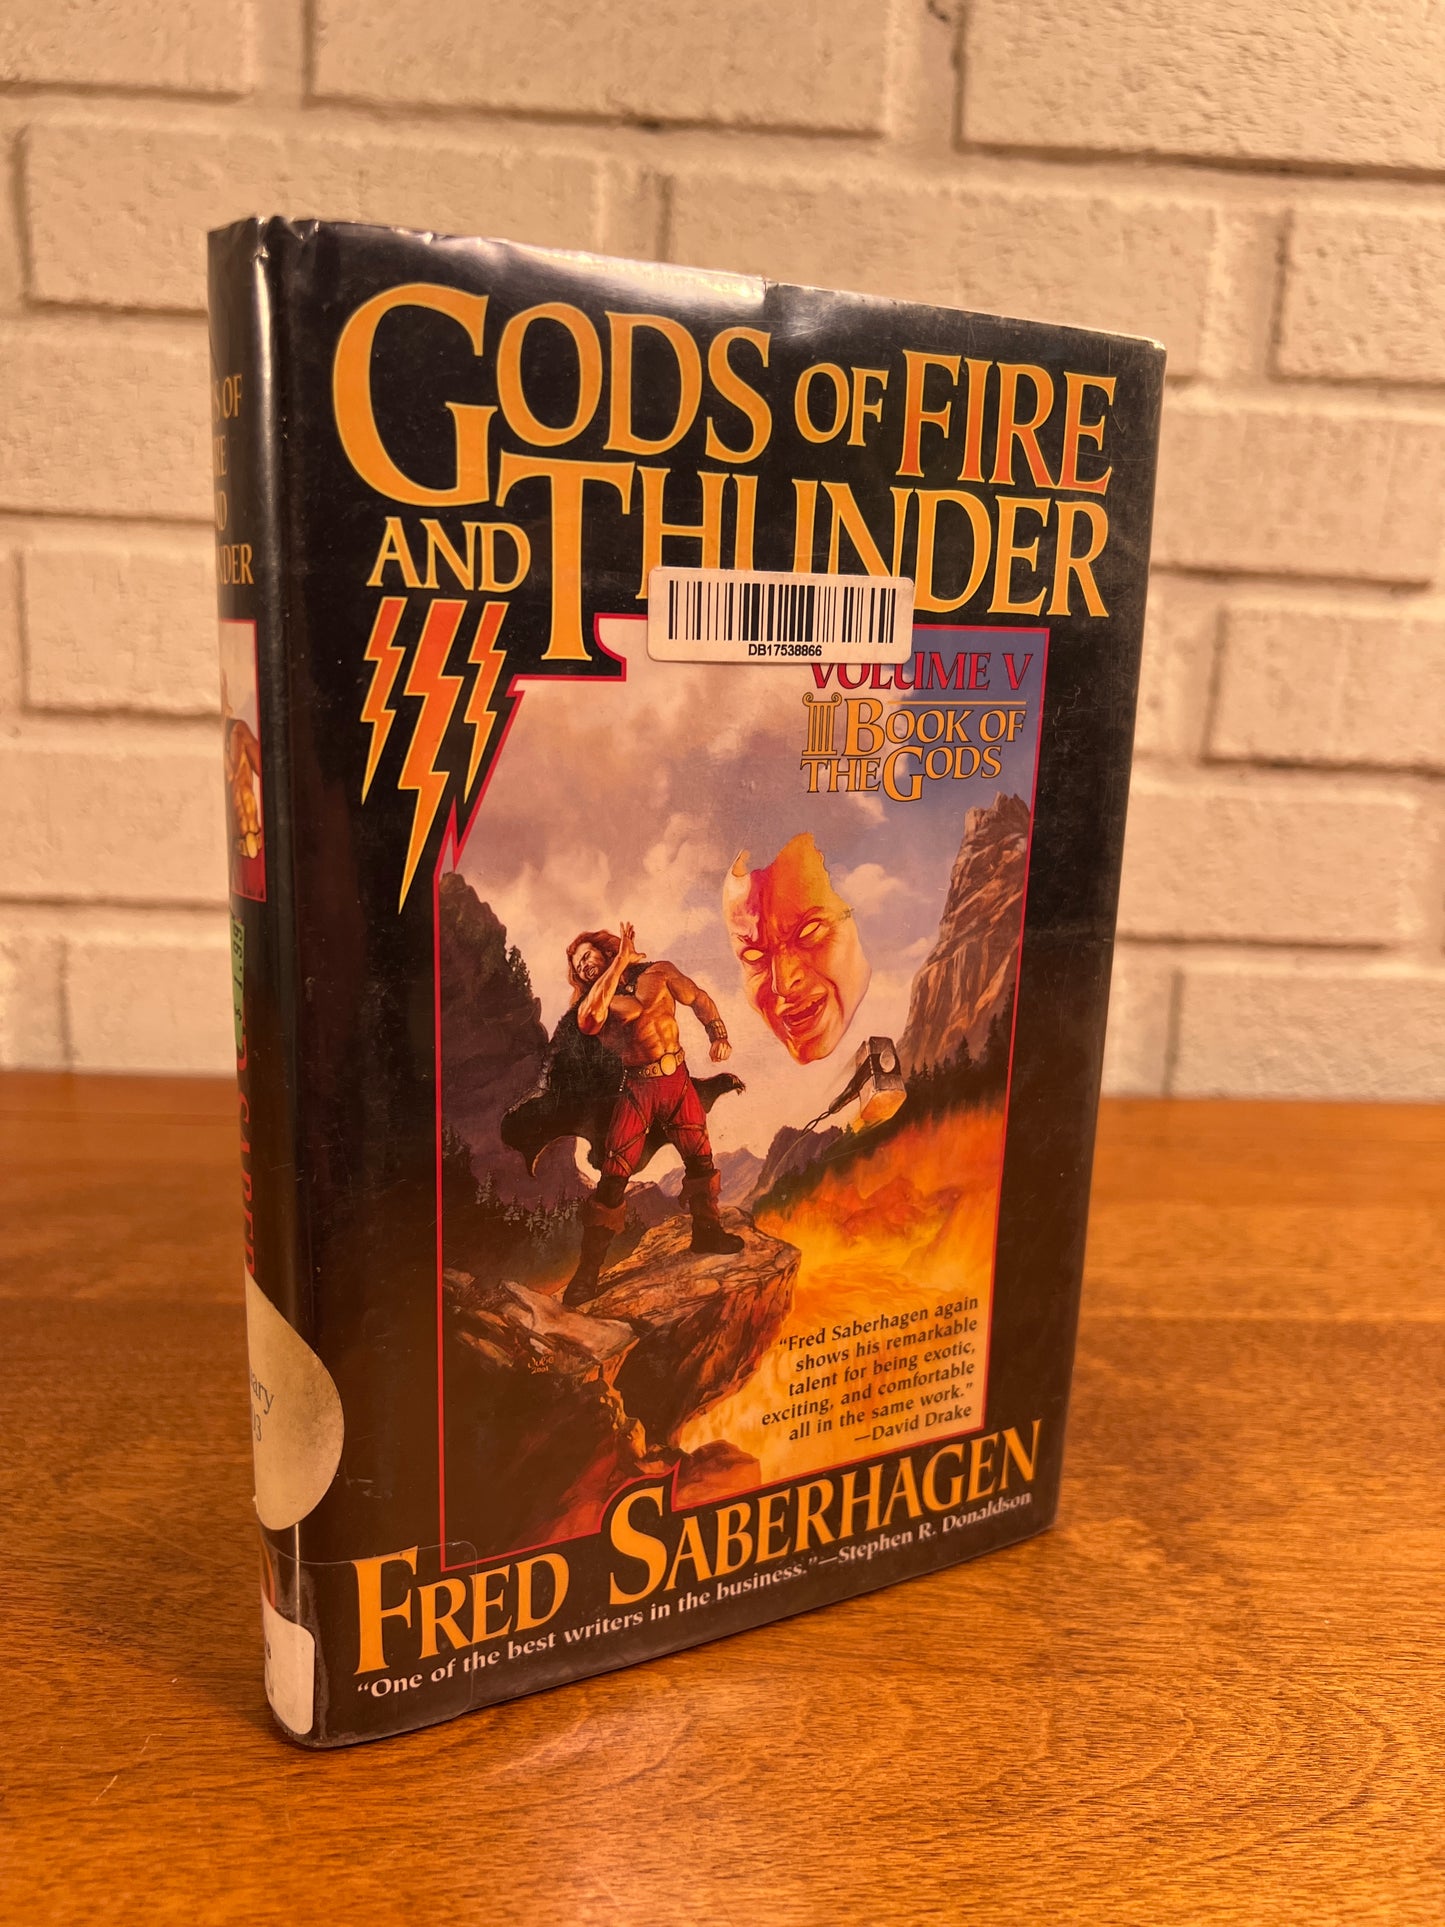 Gods of Thunder: Book of the Gods Volume 4 by Fred Saberhagen